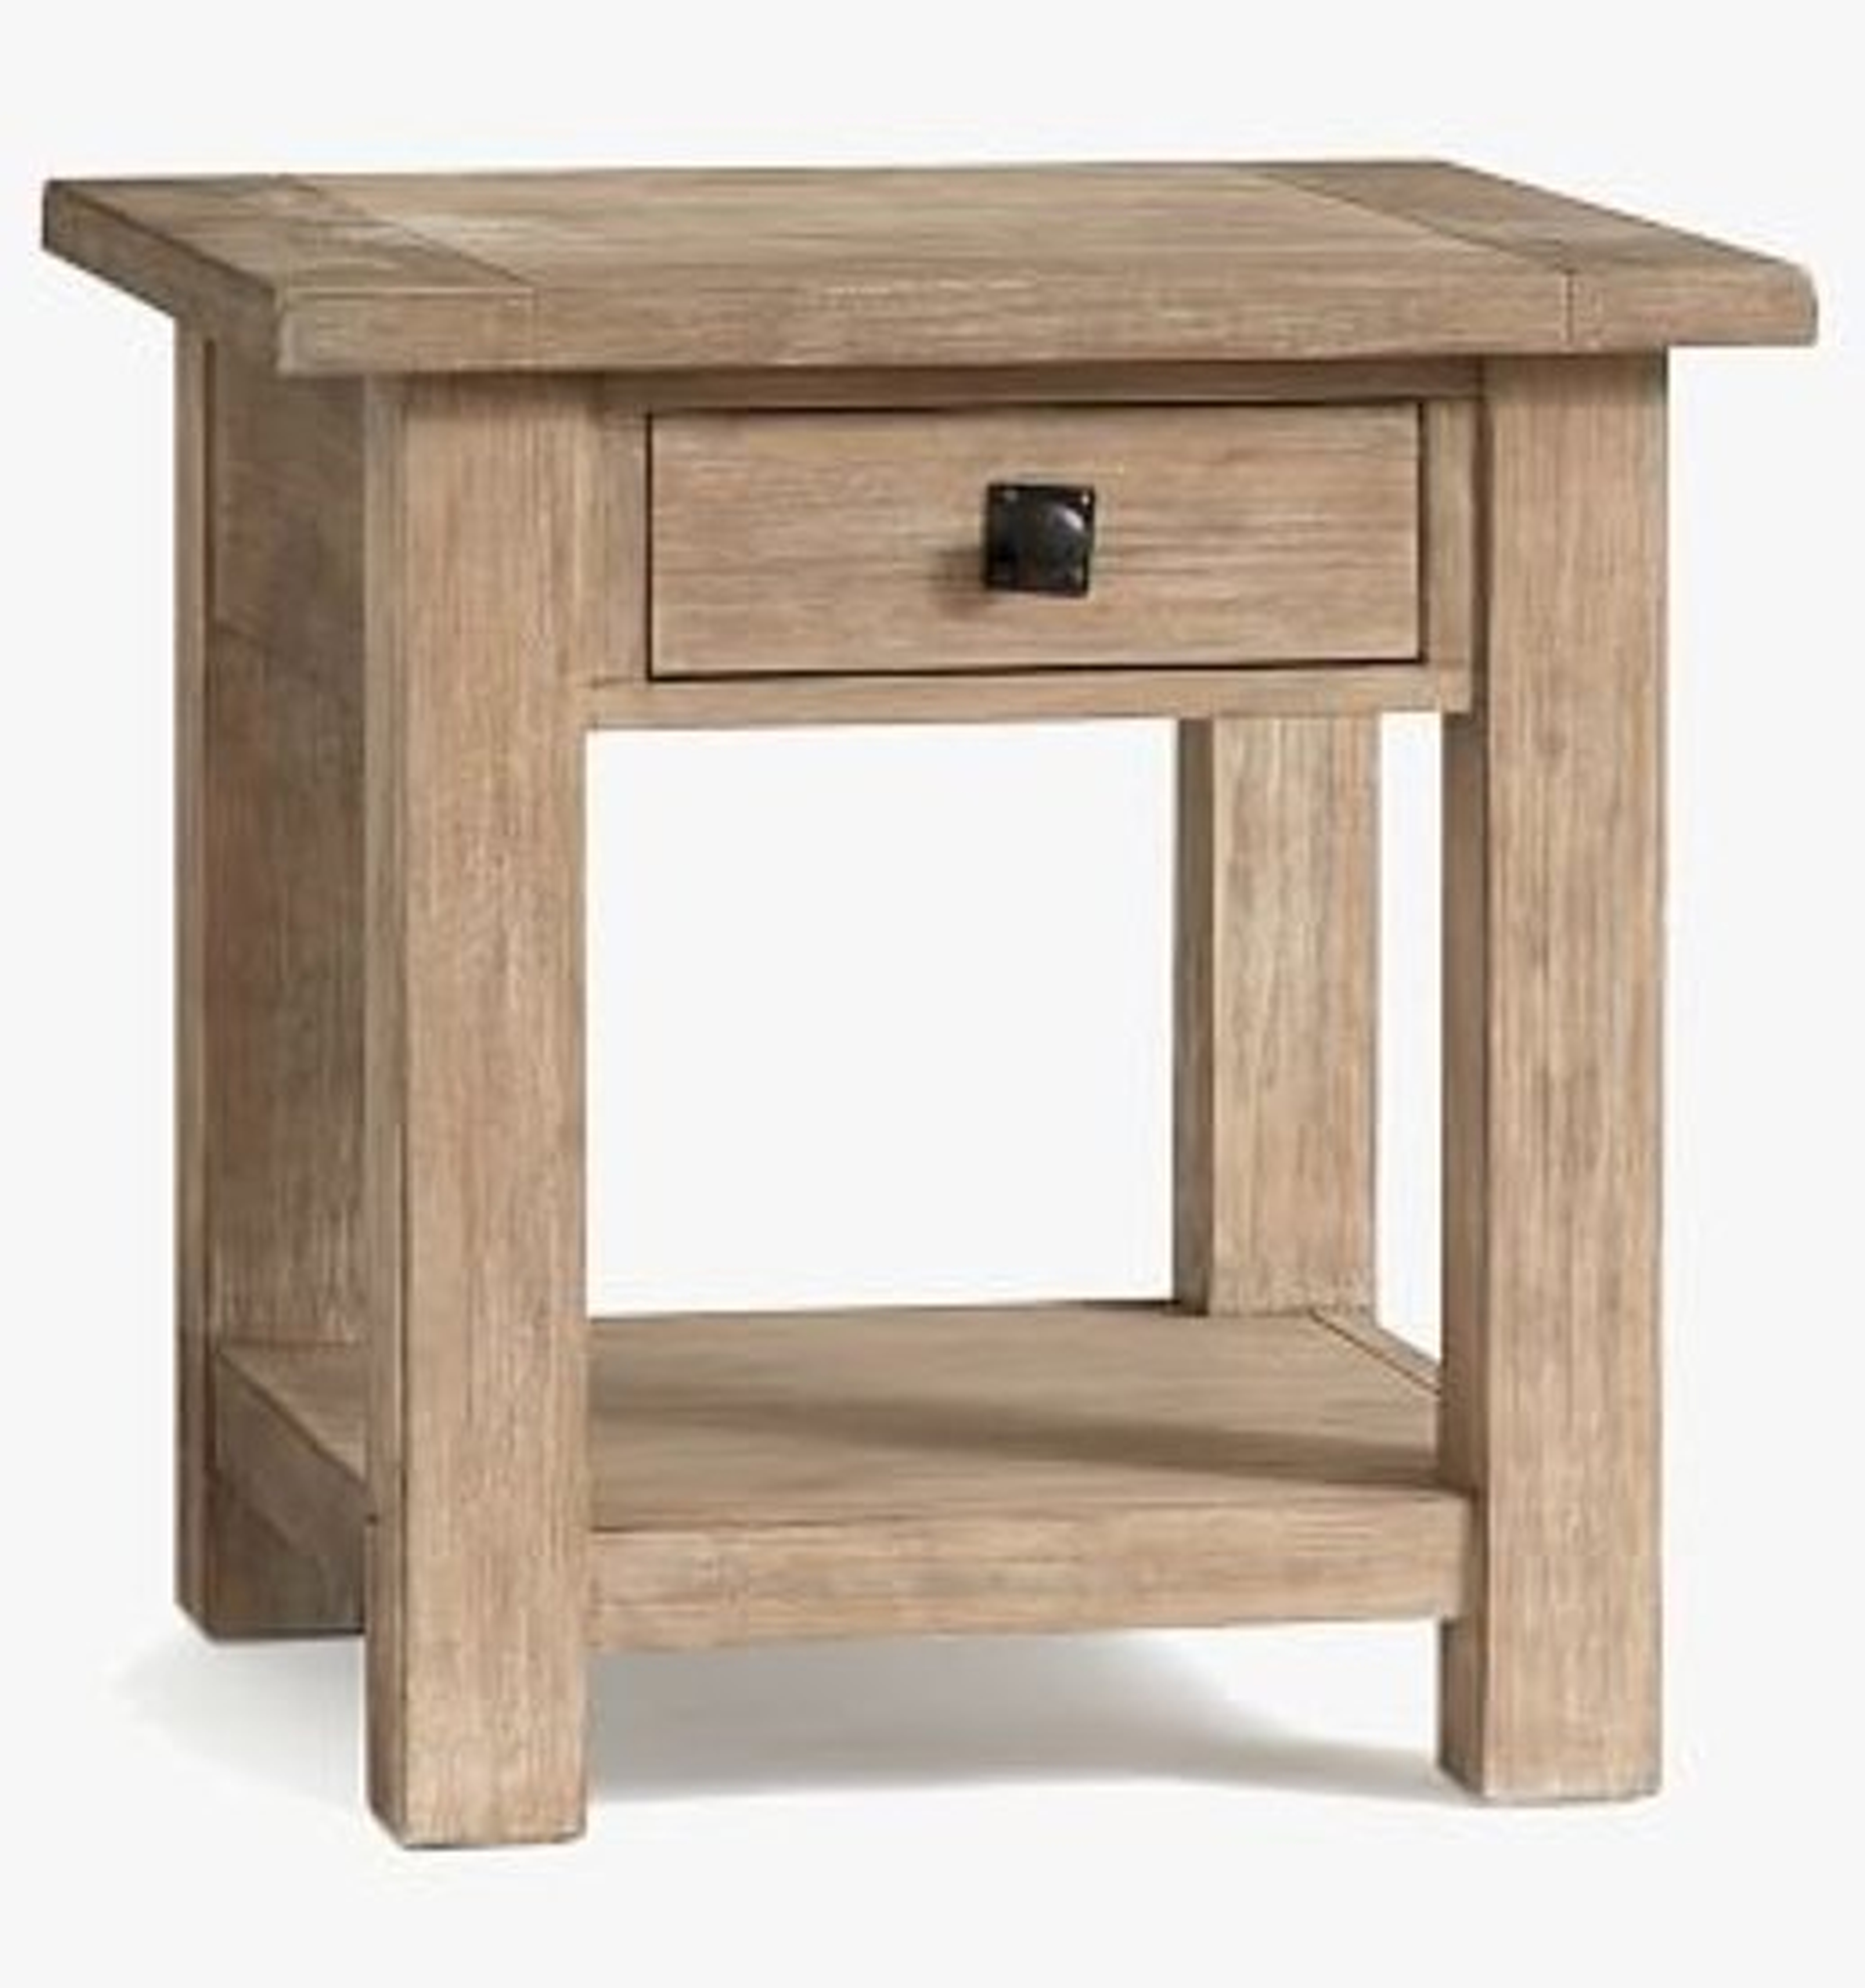 Benchwright 24" Square End Table, Seadrift - Pottery Barn